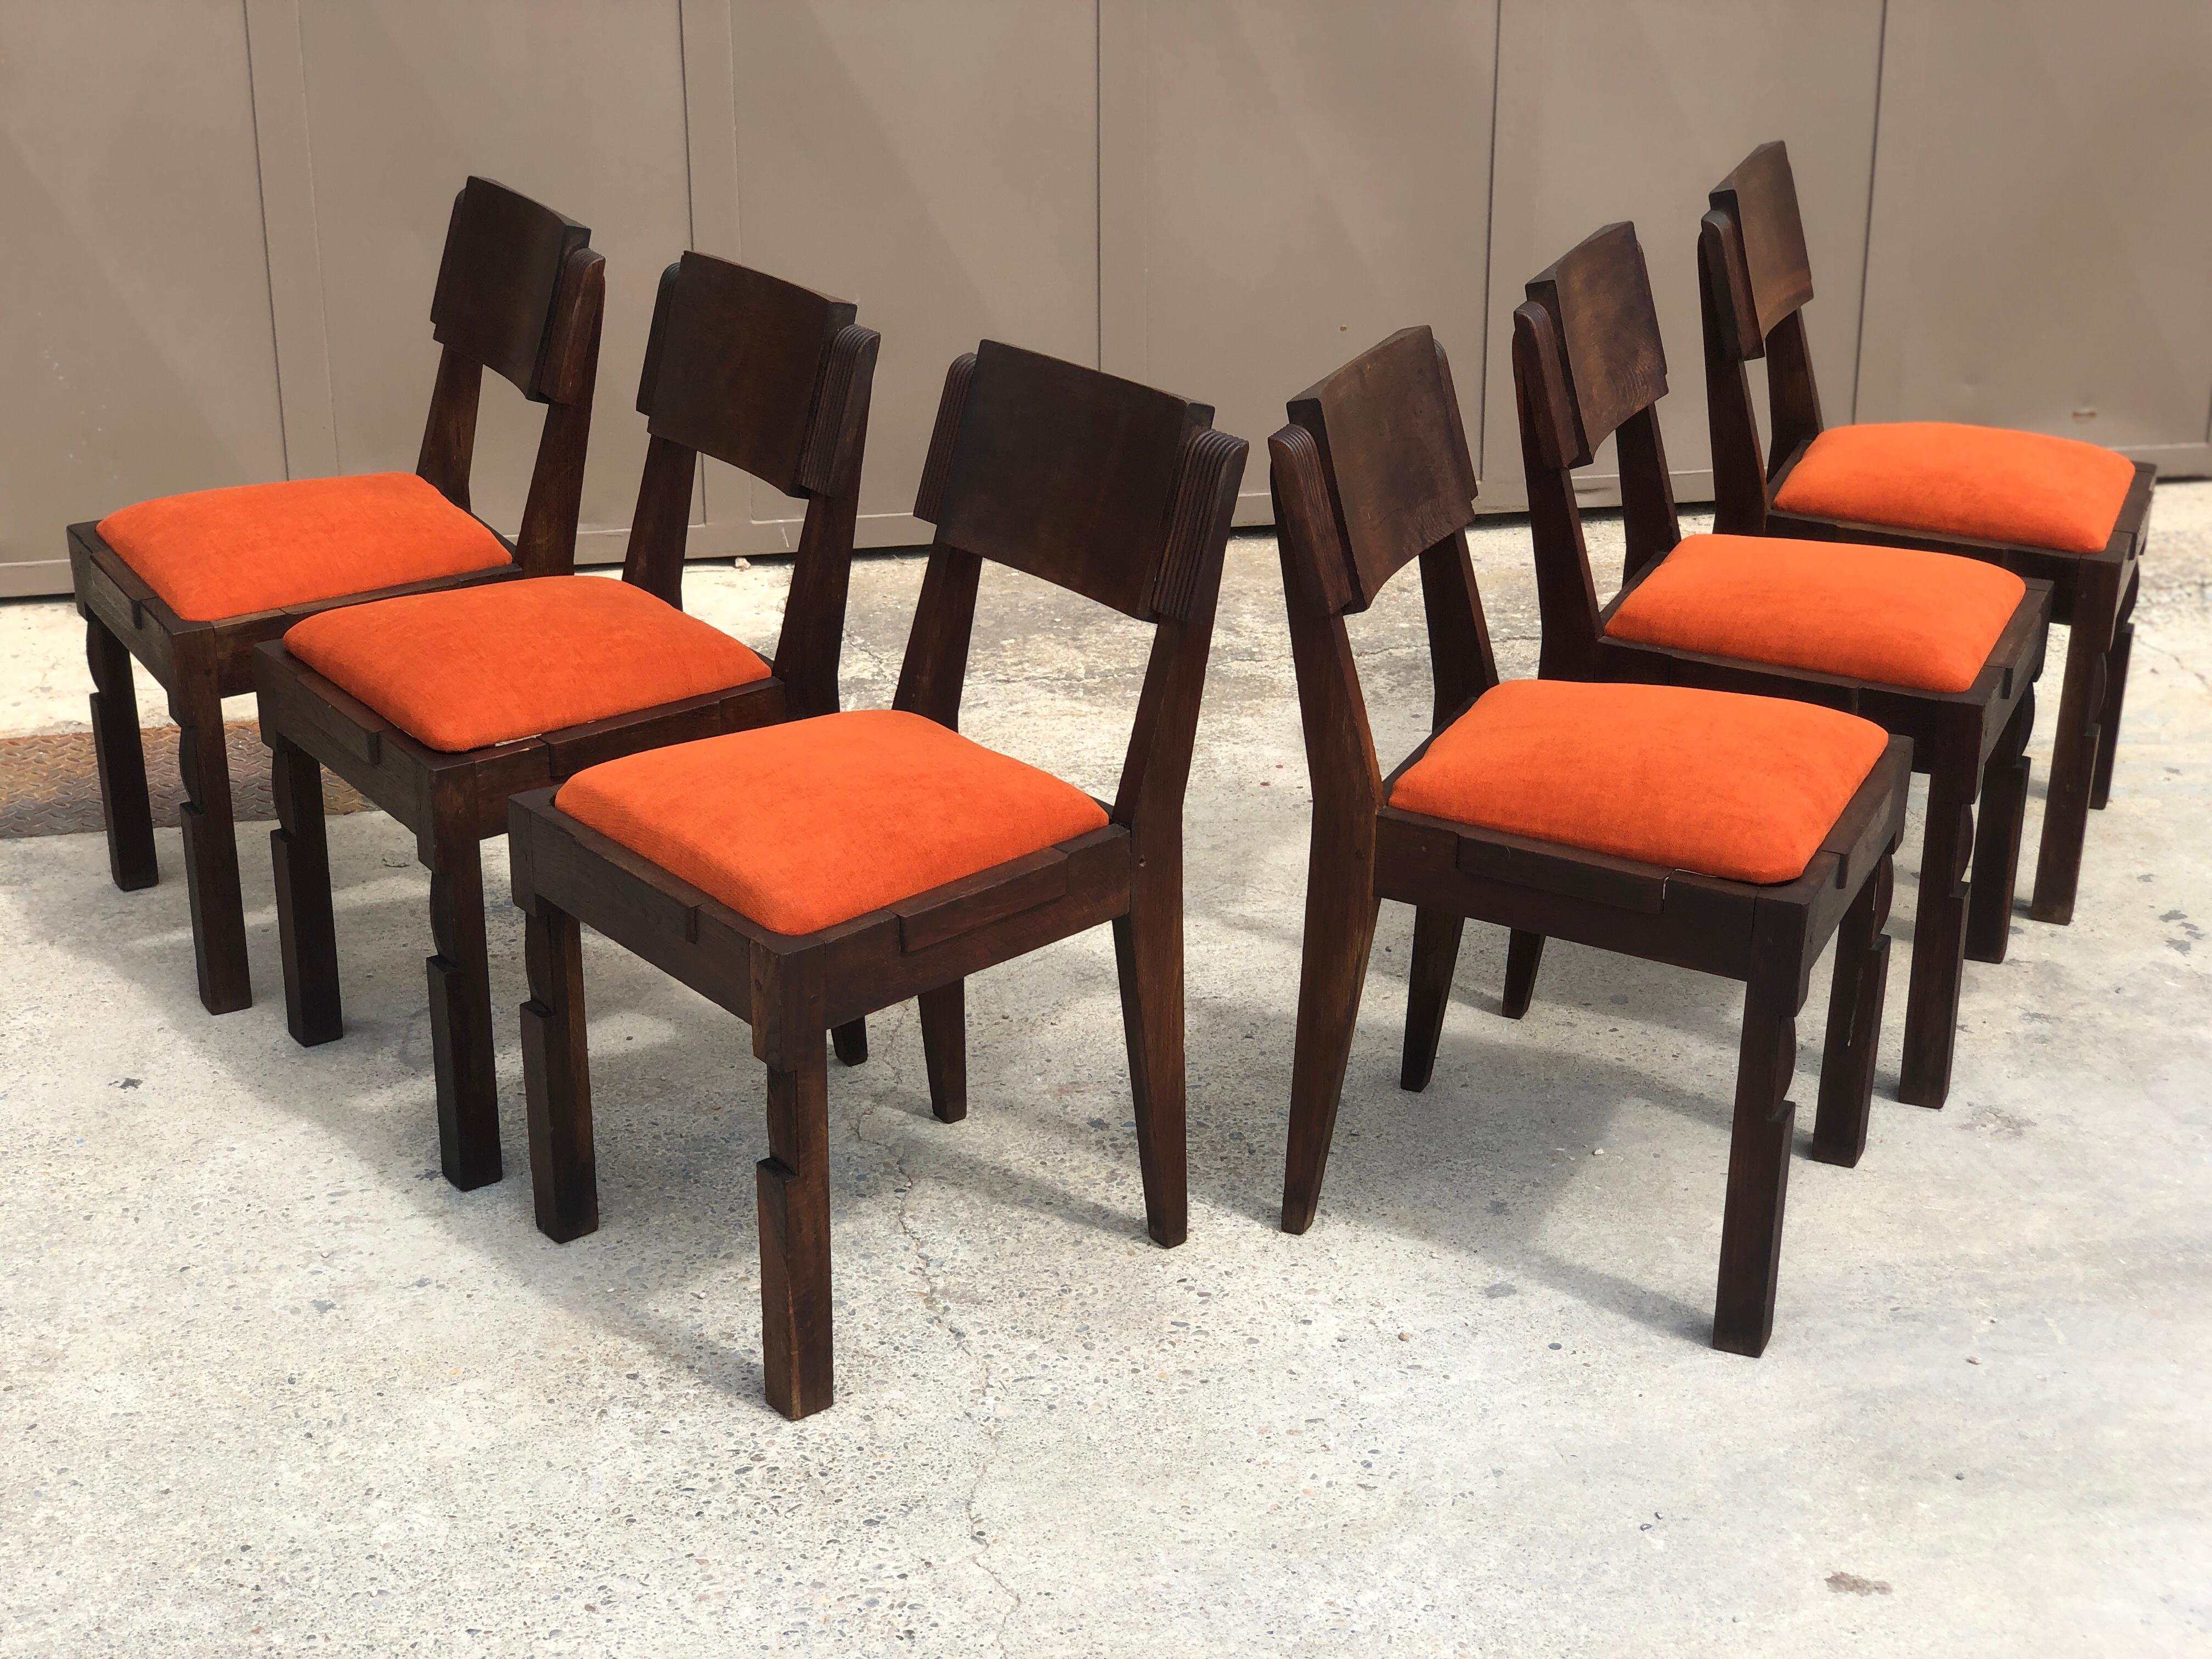 Set of 6 Charles Dudouyt chairs signed 1940 in carved oak. The legs of the chairs are carved in diamond point, the seats are removable, restored in Casal Aquaclean fabric (washable) terracotta color. The signature is on the interior crossbars.